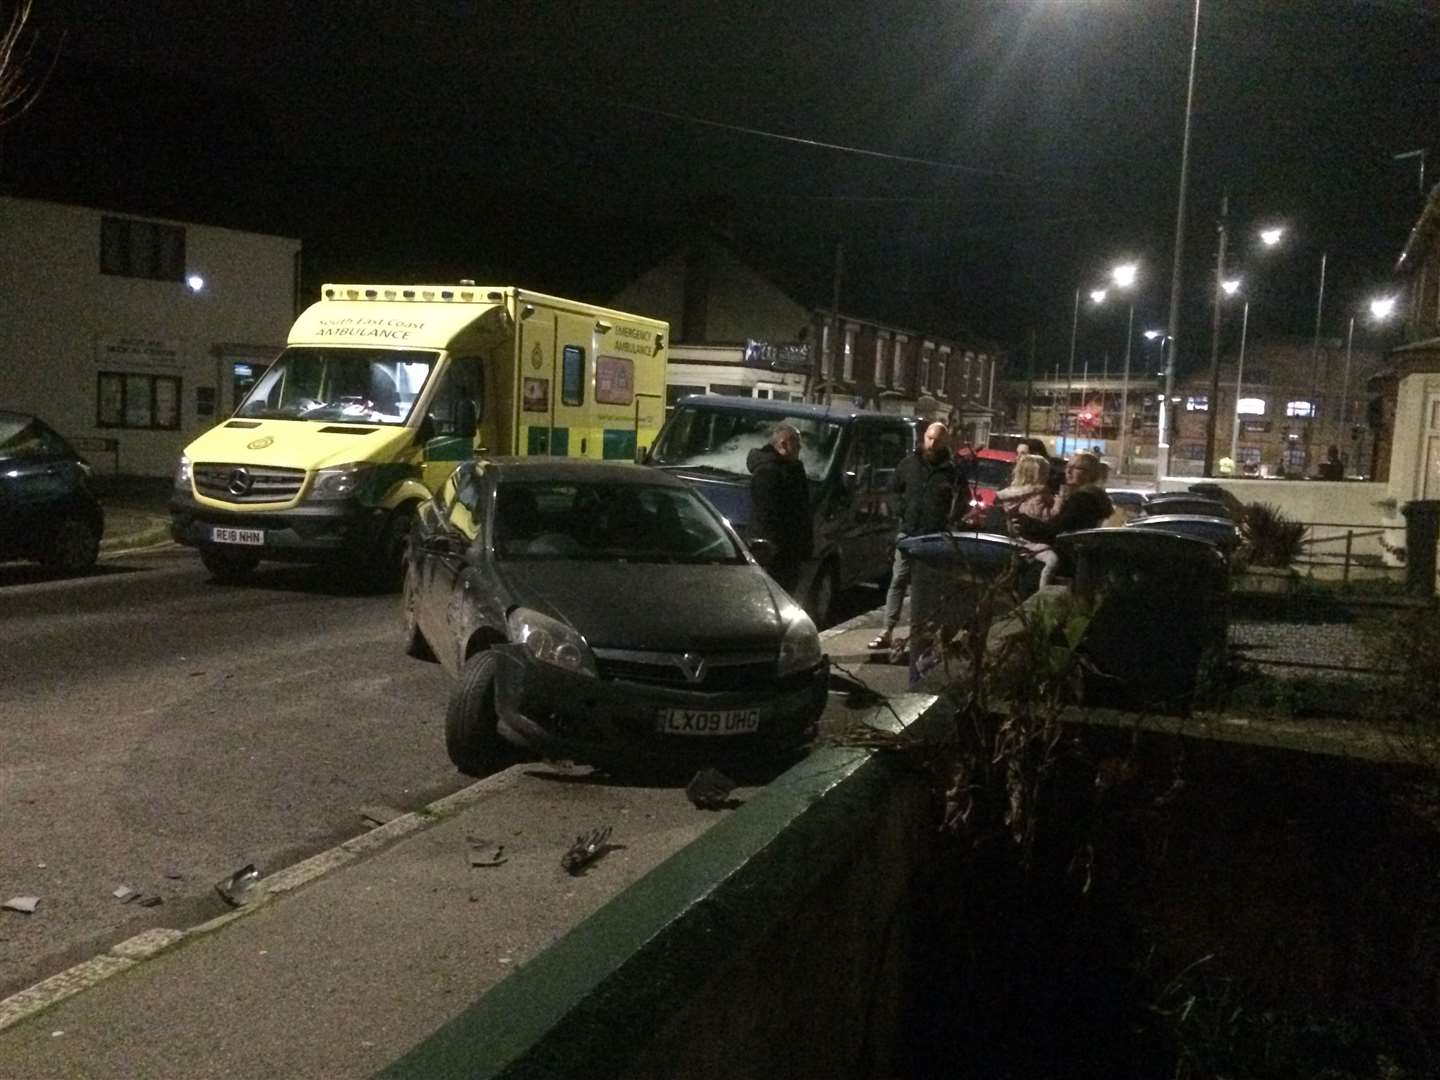 One parked vehicle was pushed up on the pavement